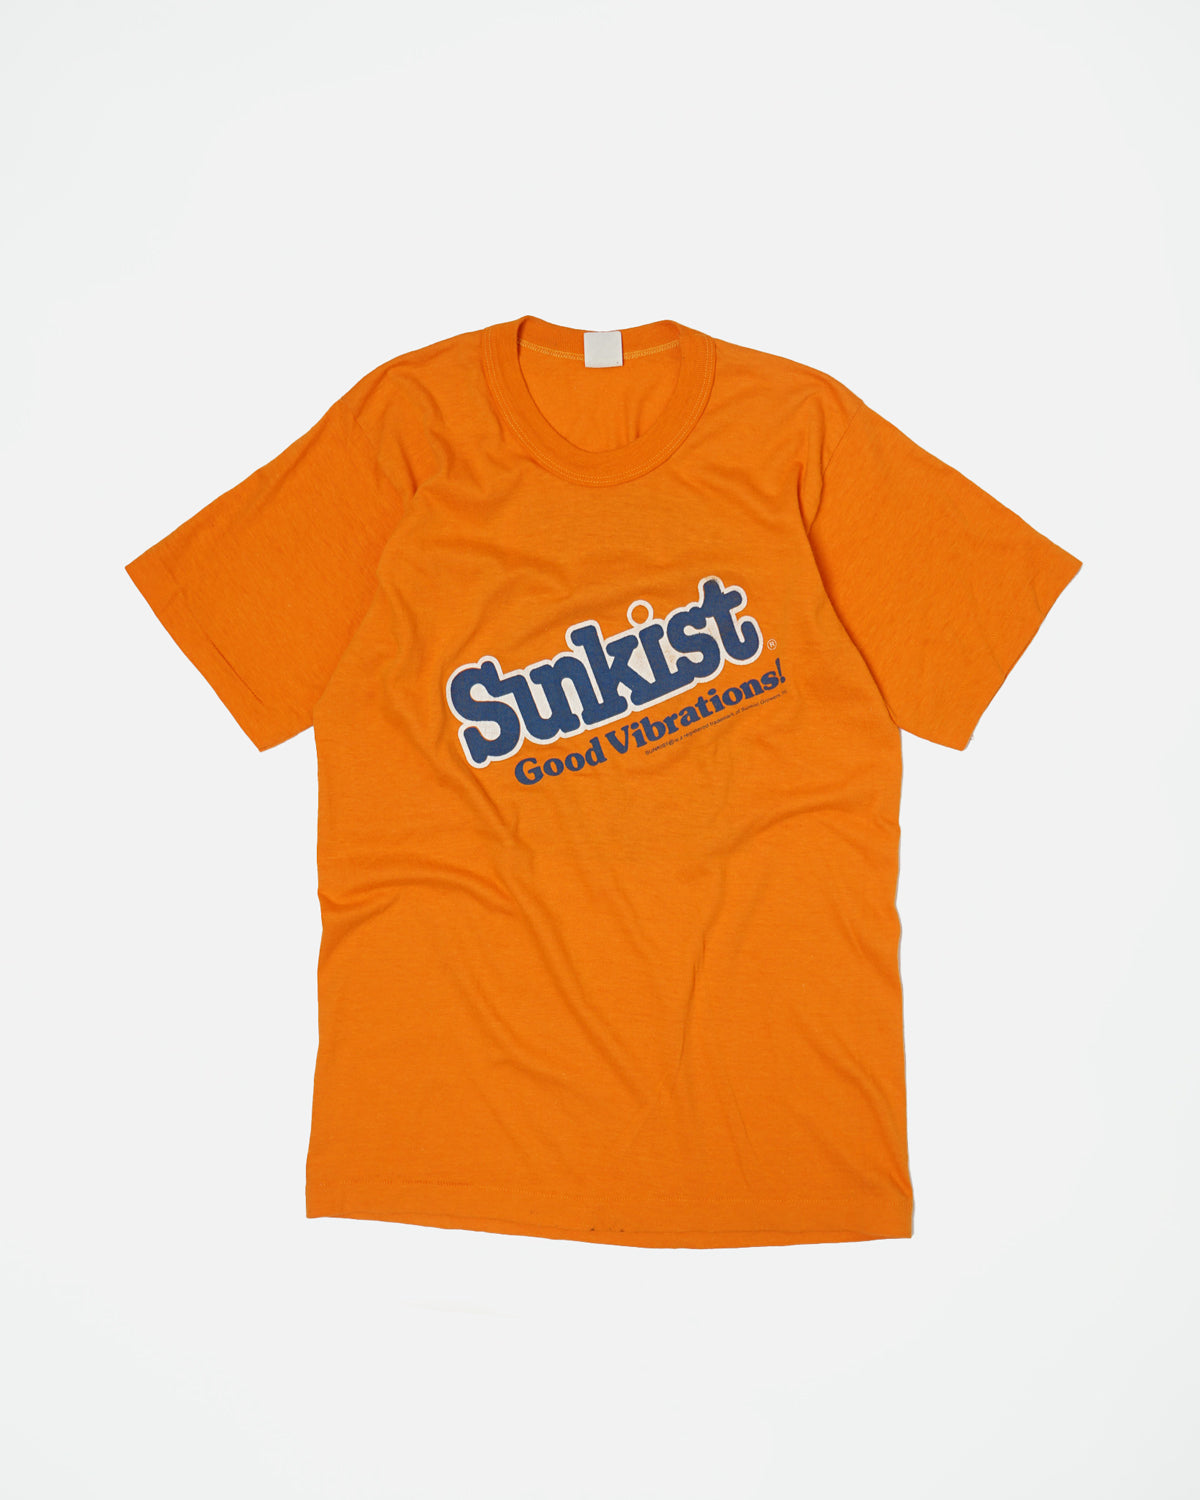 Graphic Tee / Sunkist Good Vibrations / WRND The Rock of New Orleans FM 100